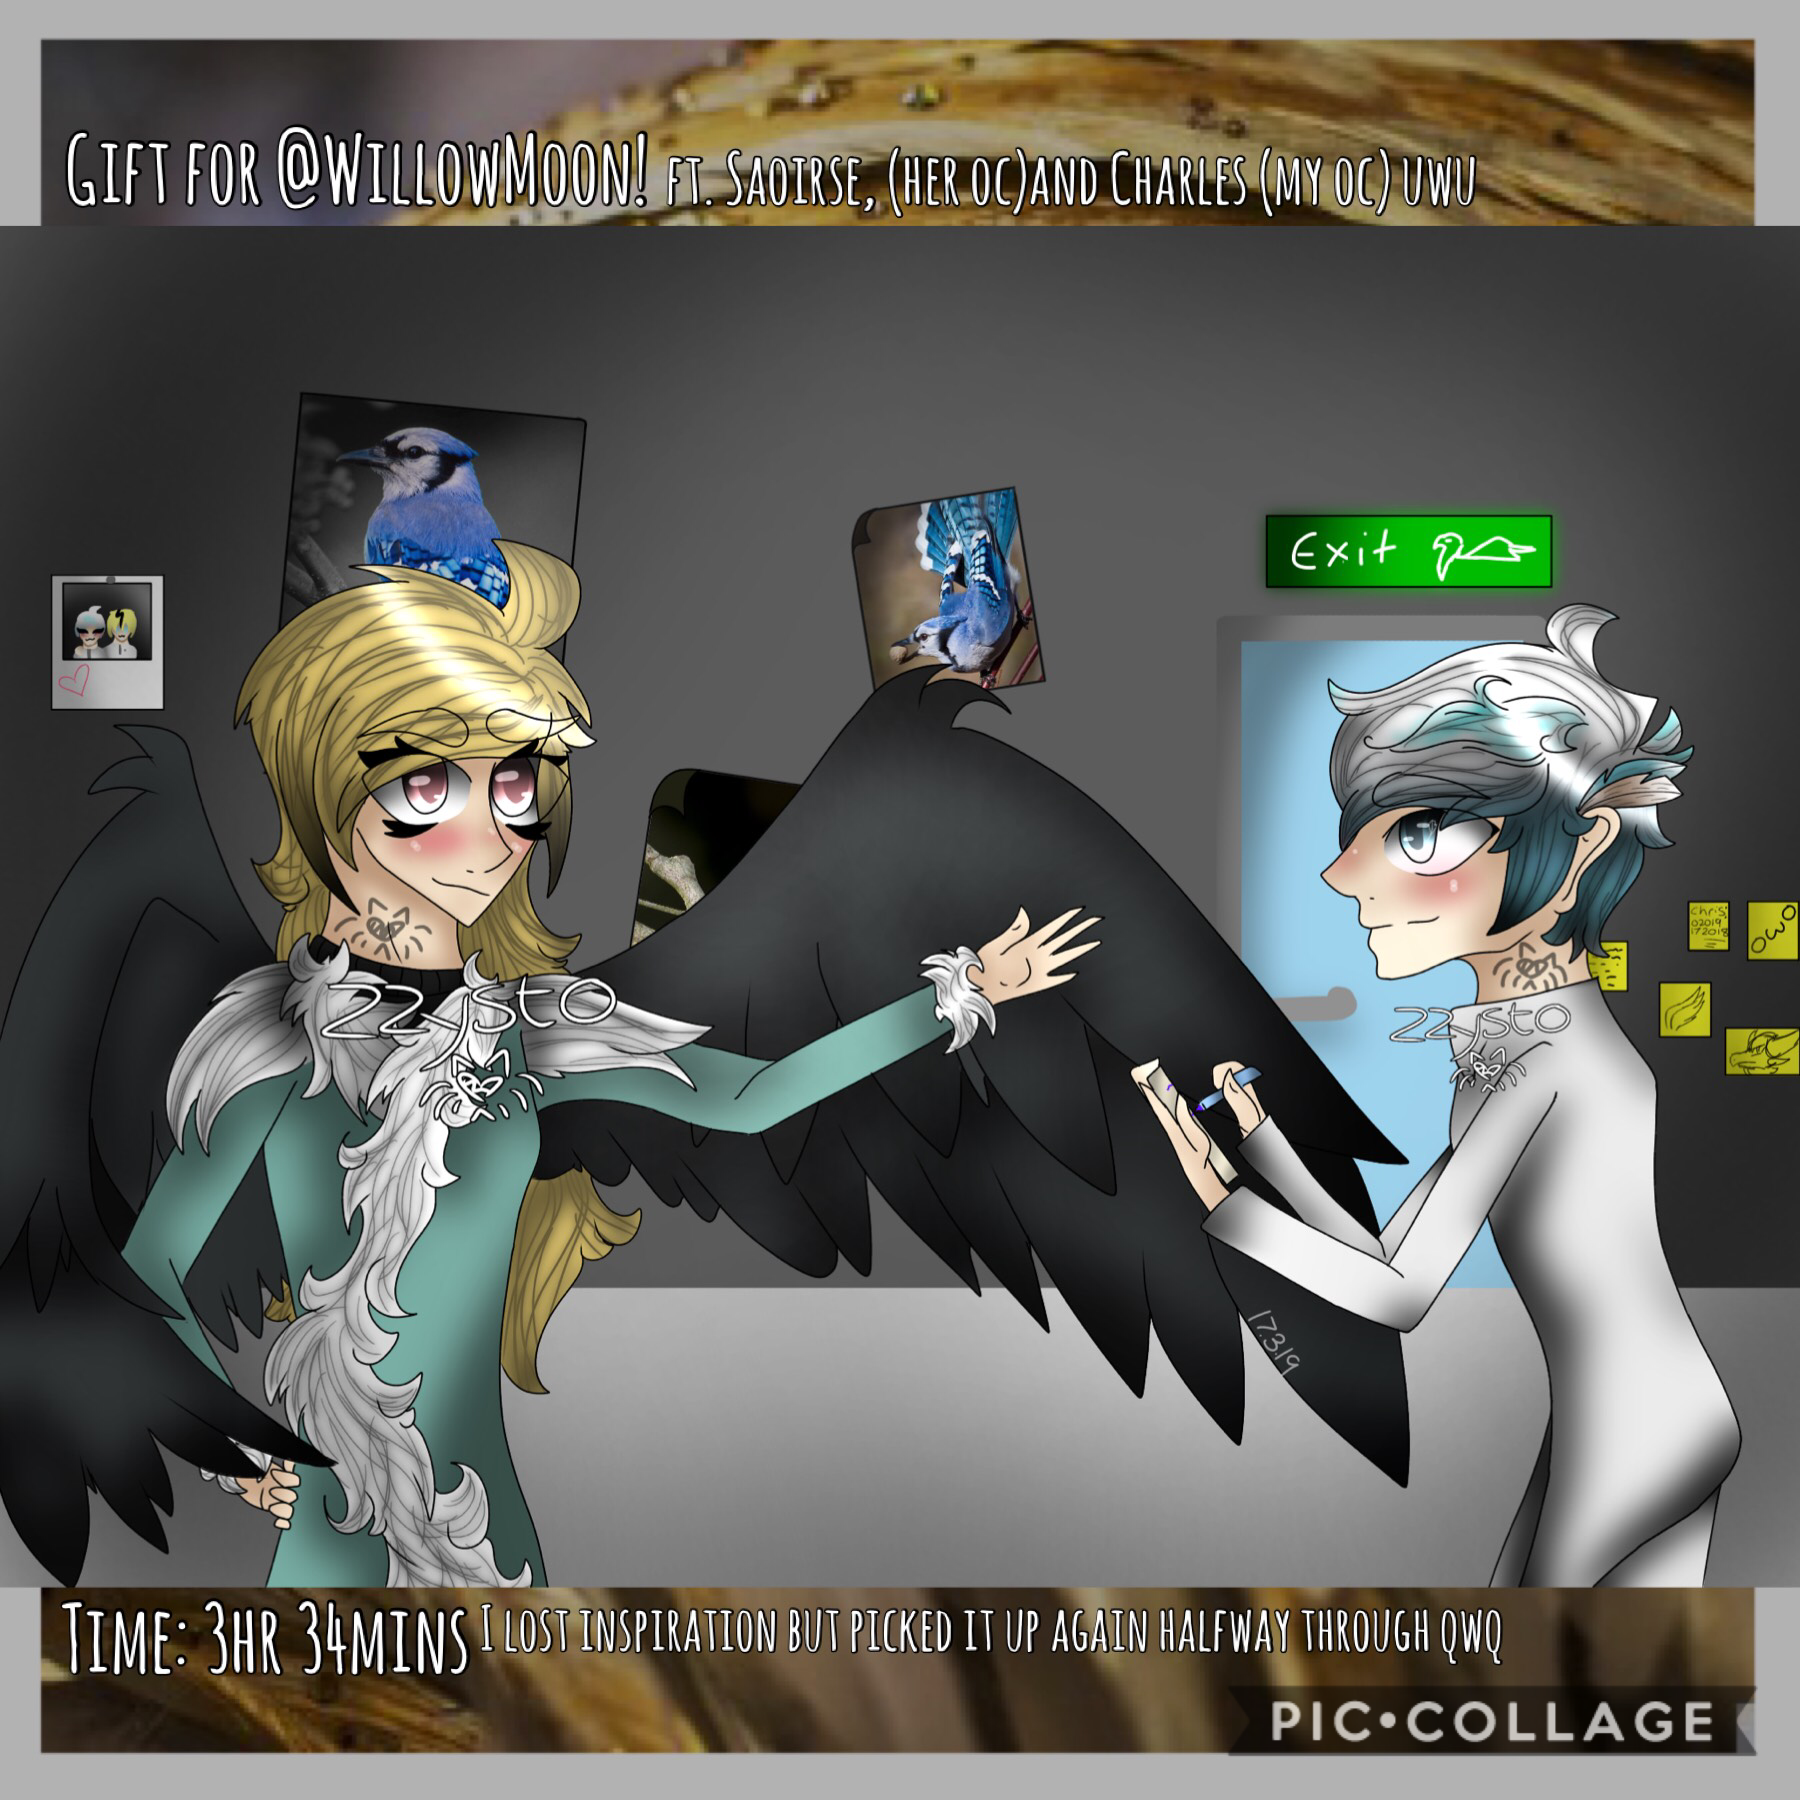 🦅Tap🦅
Hey wow I finally finished—
I’m awful at drawing rooms,, but I added a lil backstory hint of Charles on the wall uwuwu
I hope you like it, Alazel! I had fun drawing Saoirse, and got lazy drawing Charles qwq
now it’s homework tiem